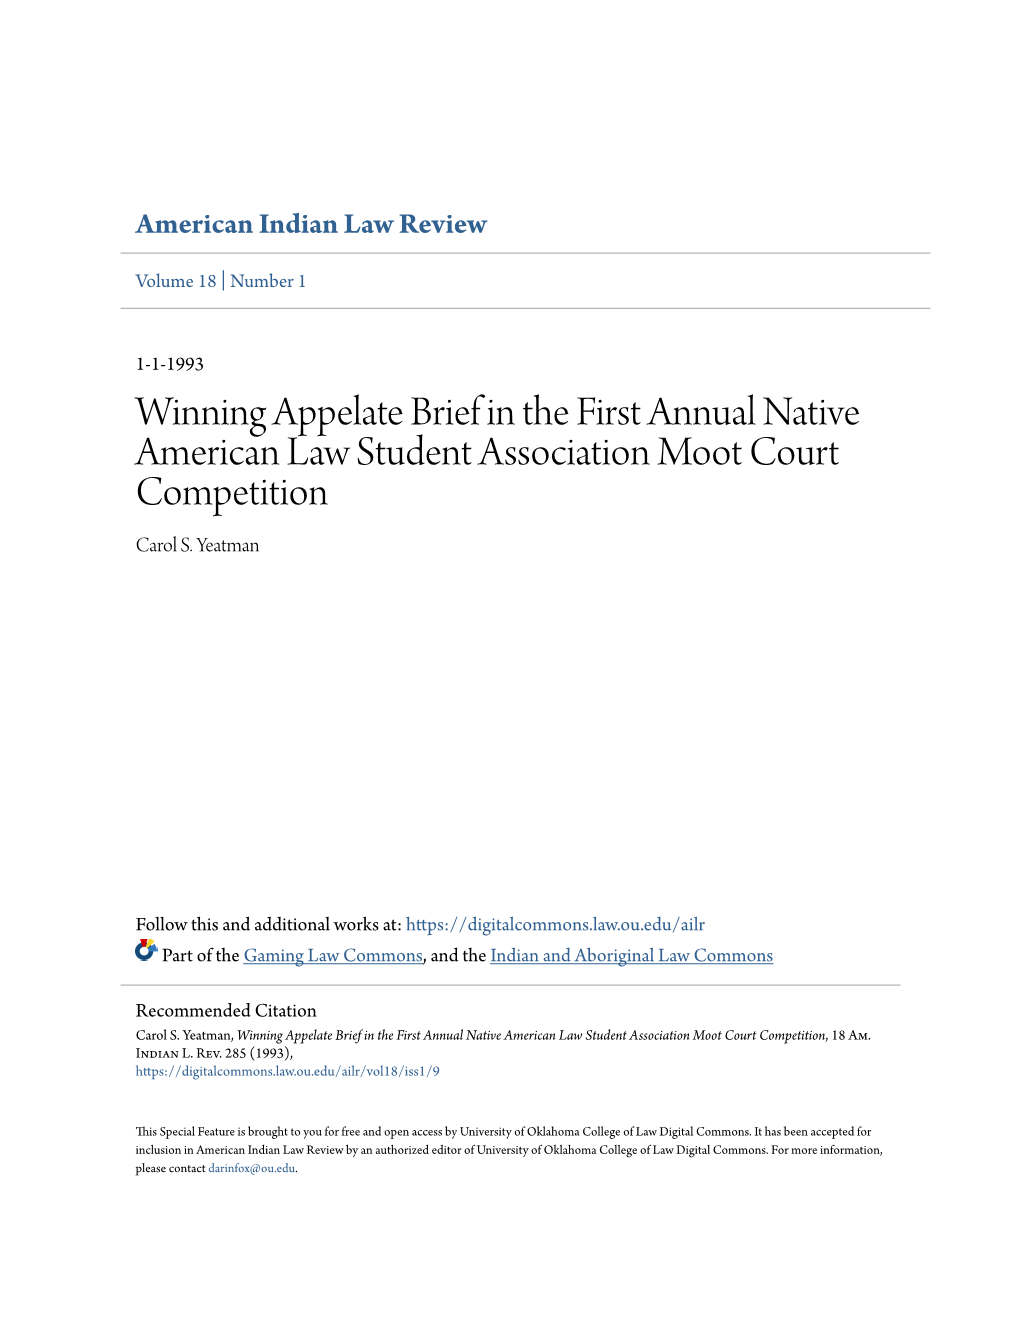 Winning Appelate Brief in the First Annual Native American Law Student Association Moot Court Competition Carol S